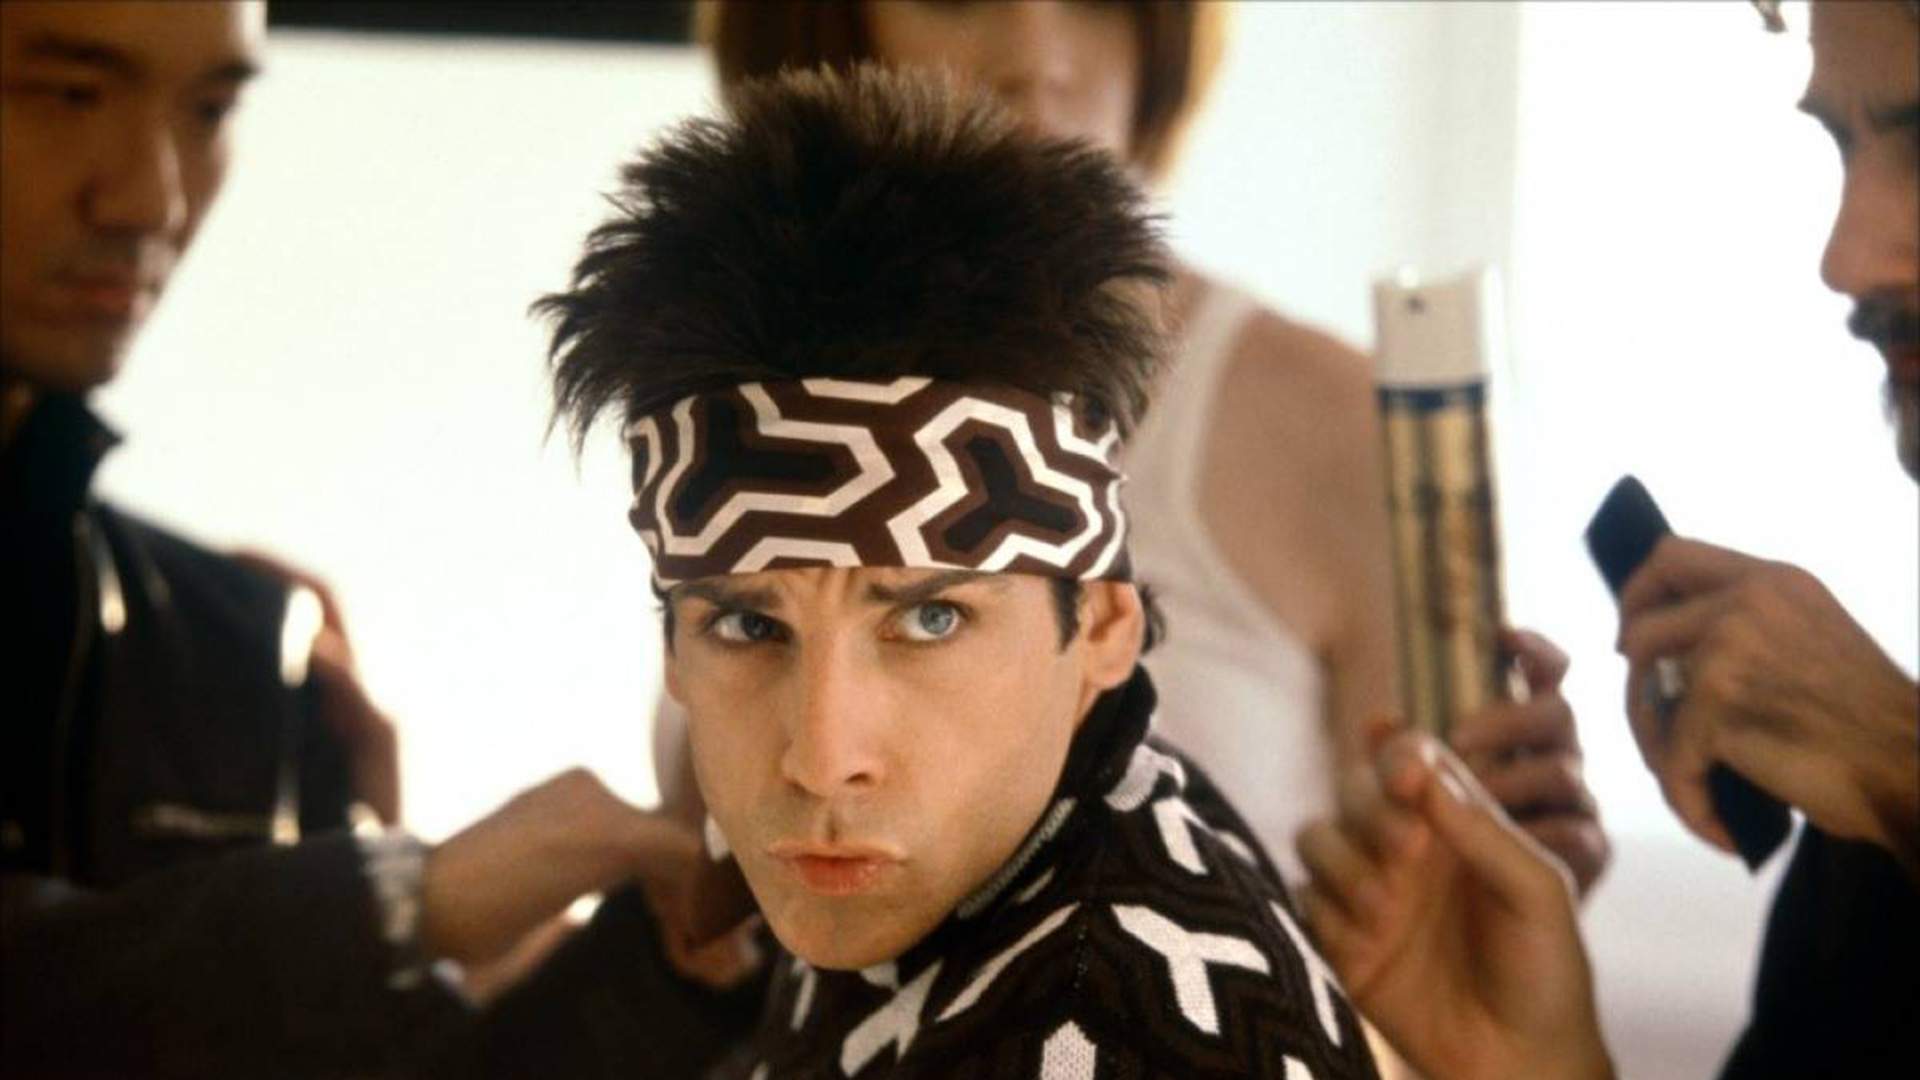 Fantastic Film Festival Australia's 2023 Lineup Includes Nude 'Zoolander' and Scratch-and-Sniff 'Ninja Turtles'